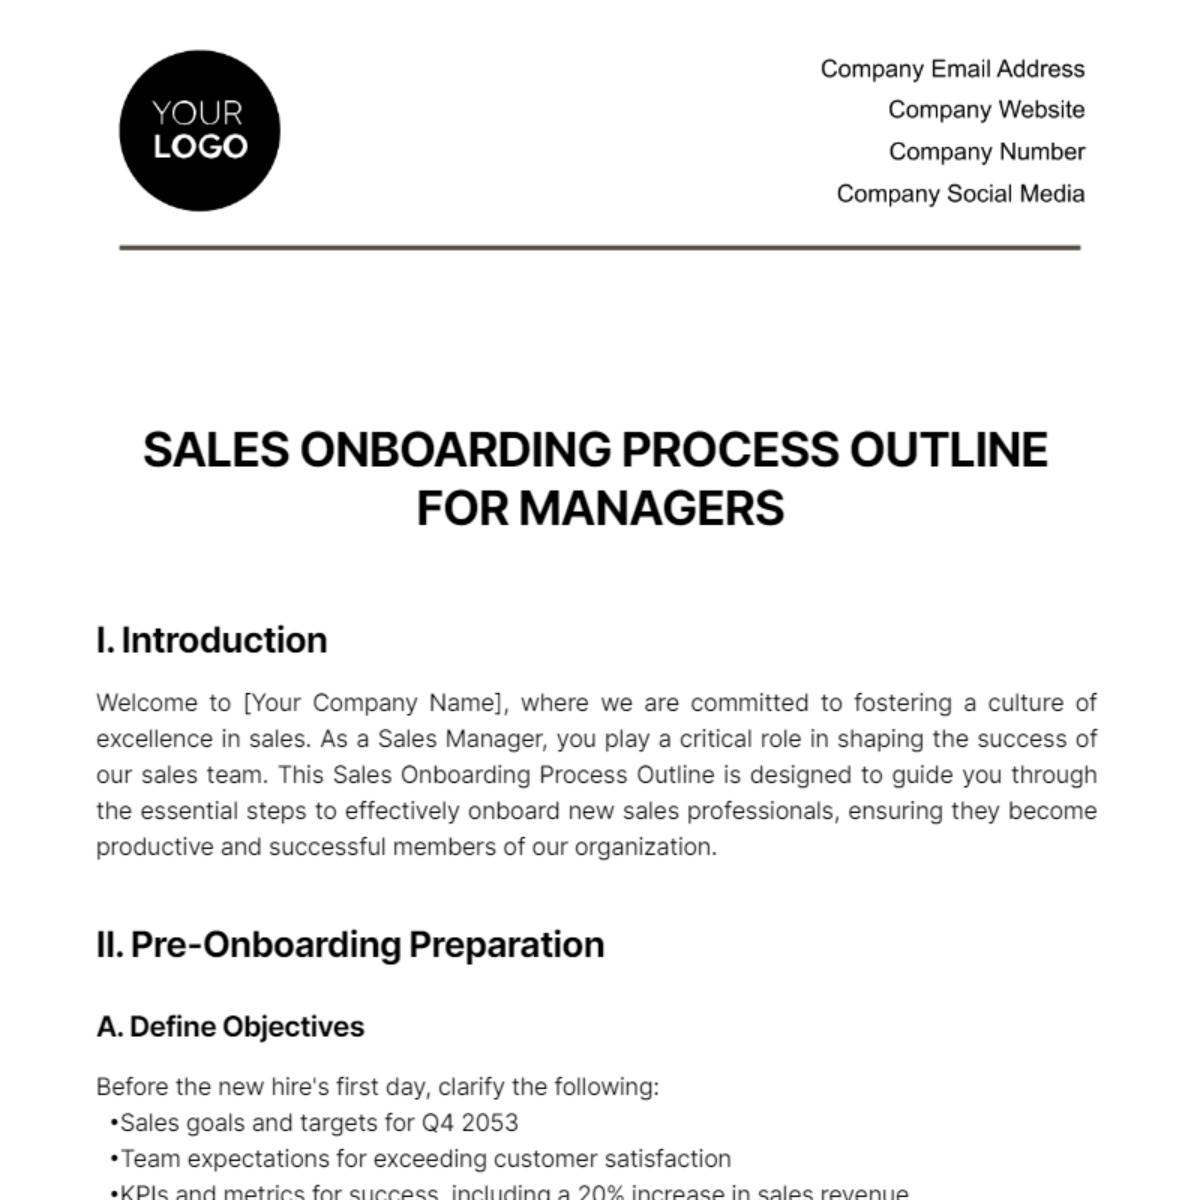 Free Sales Onboarding Process Outline for Managers Template